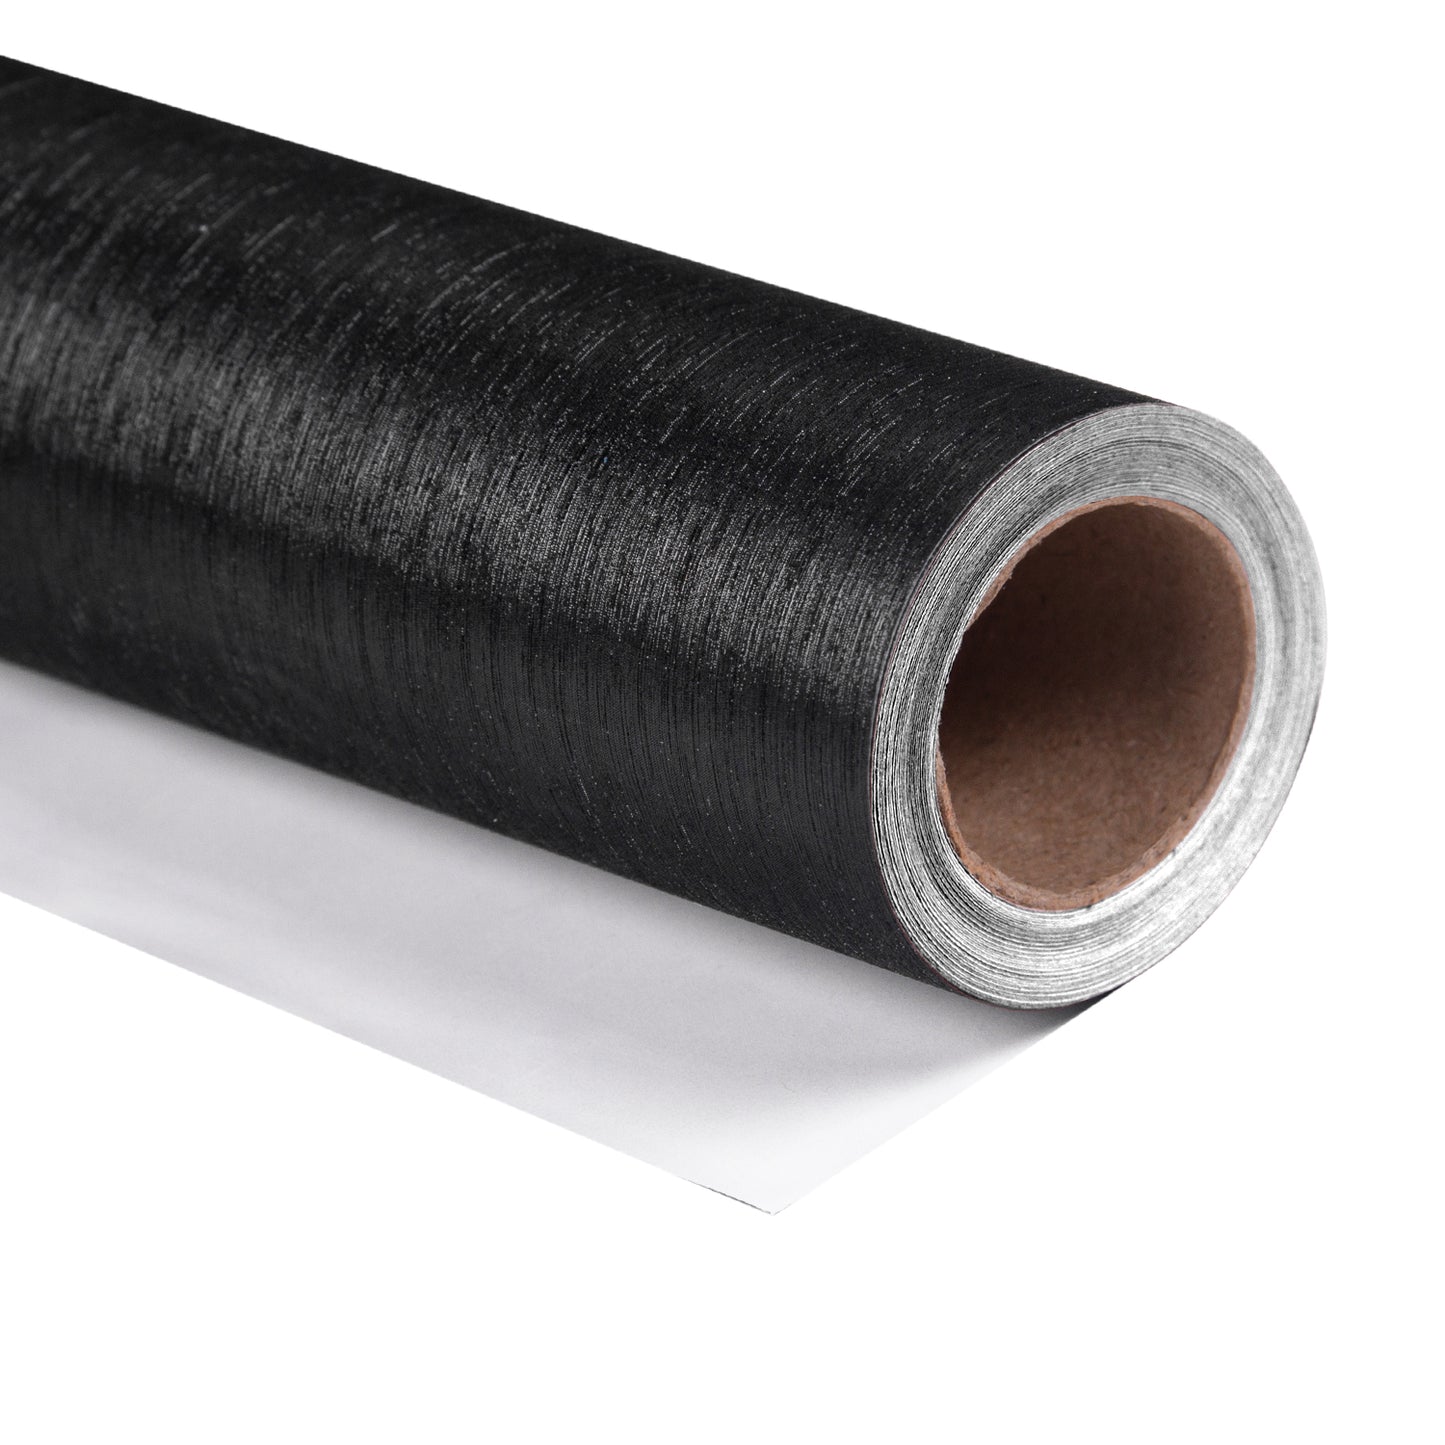 Brushed Aluminum Texture Metallic Wrapping Paper Roll Black Ream Wholesale Wraphaholic